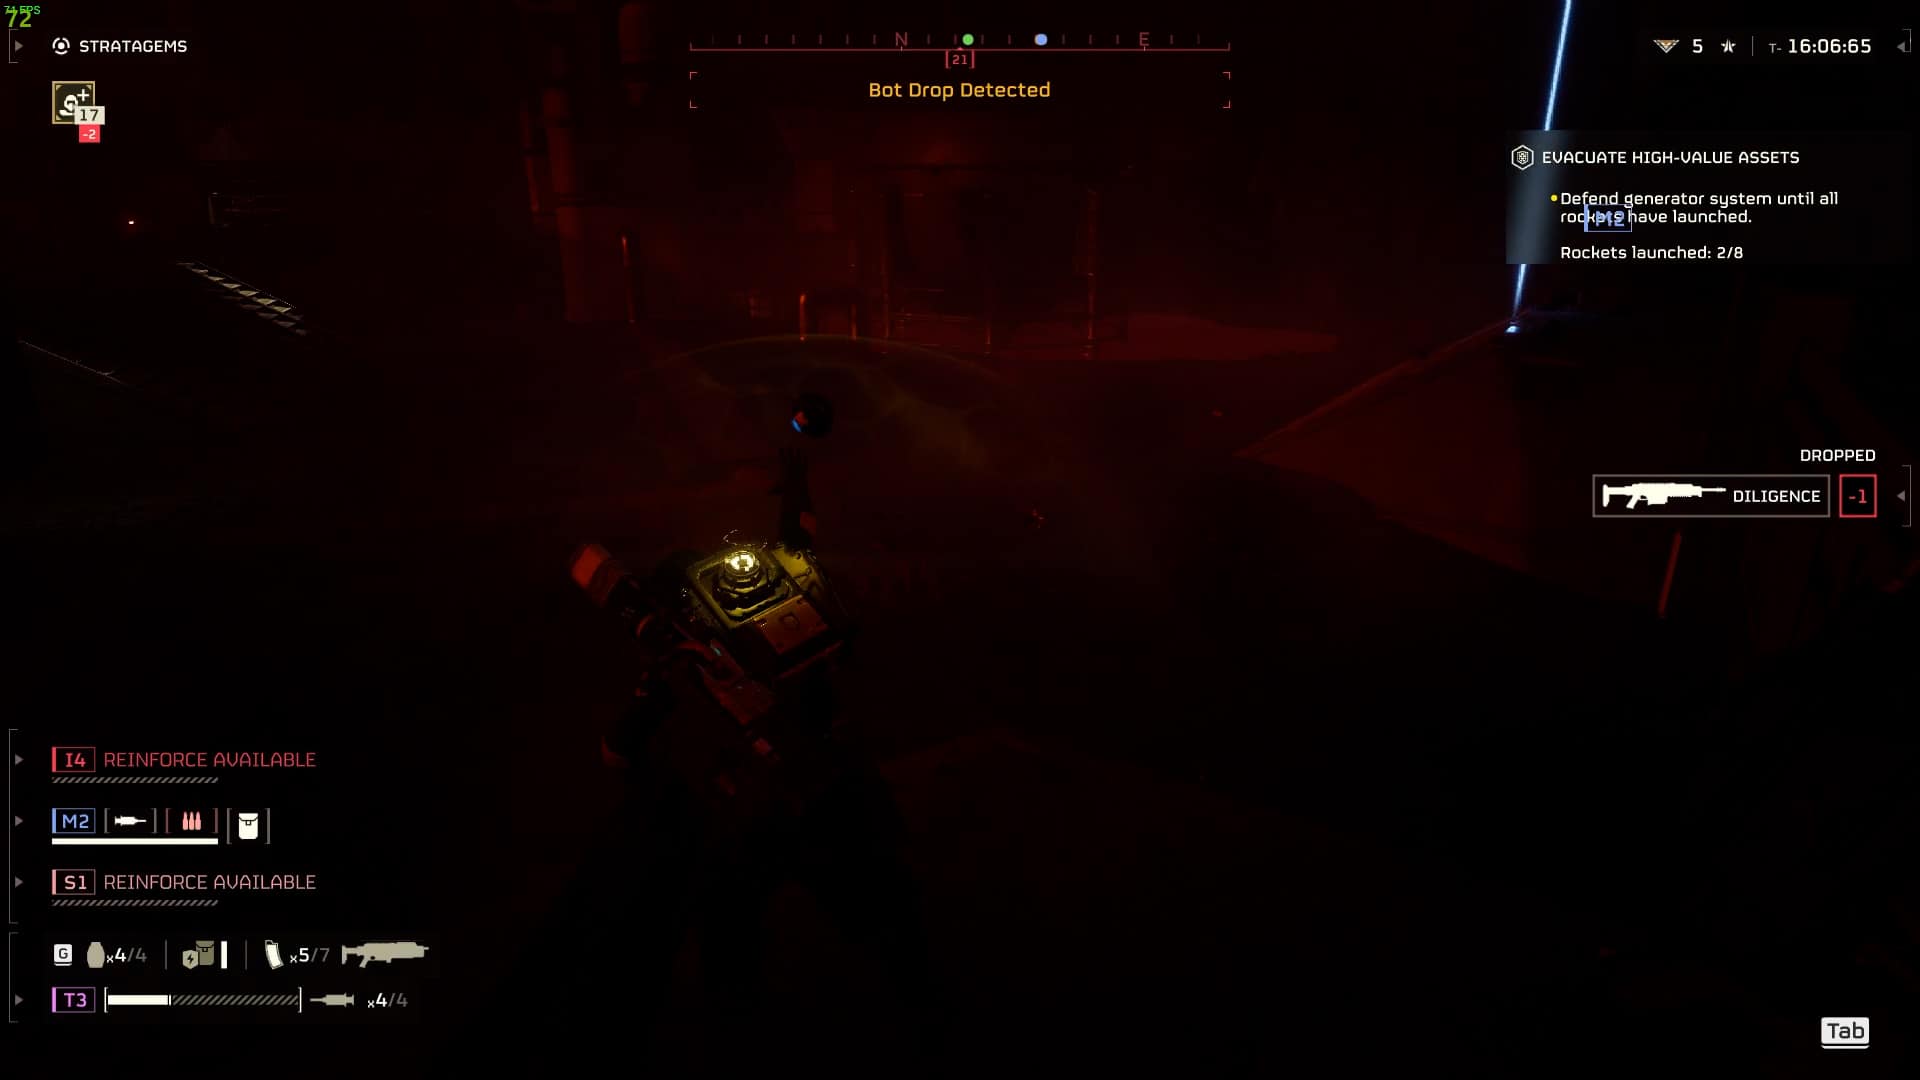 A player in a dark, atmospheric sci-fi video game environment aiming at an enemy, with HUD displaying mission details and game stats, overhears Helldivers 2 players saying, "Reinforcements